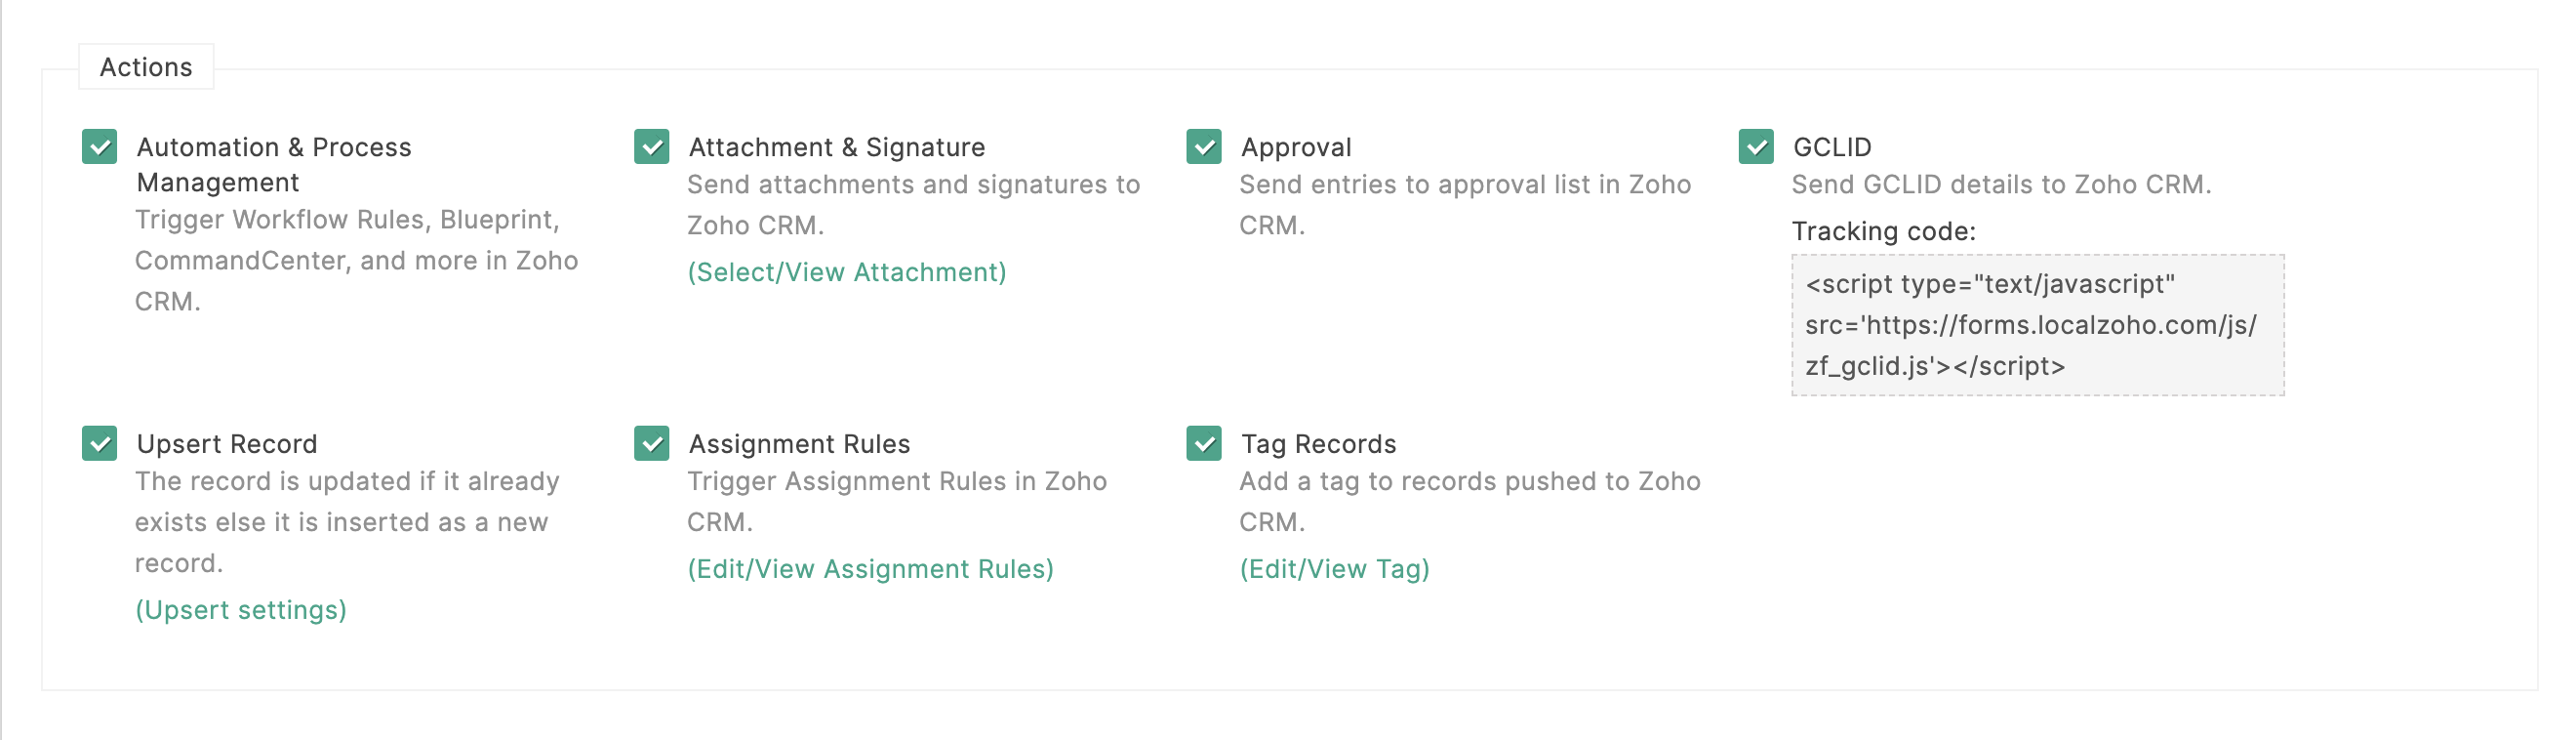 Trigger Actions in Zoho CRM